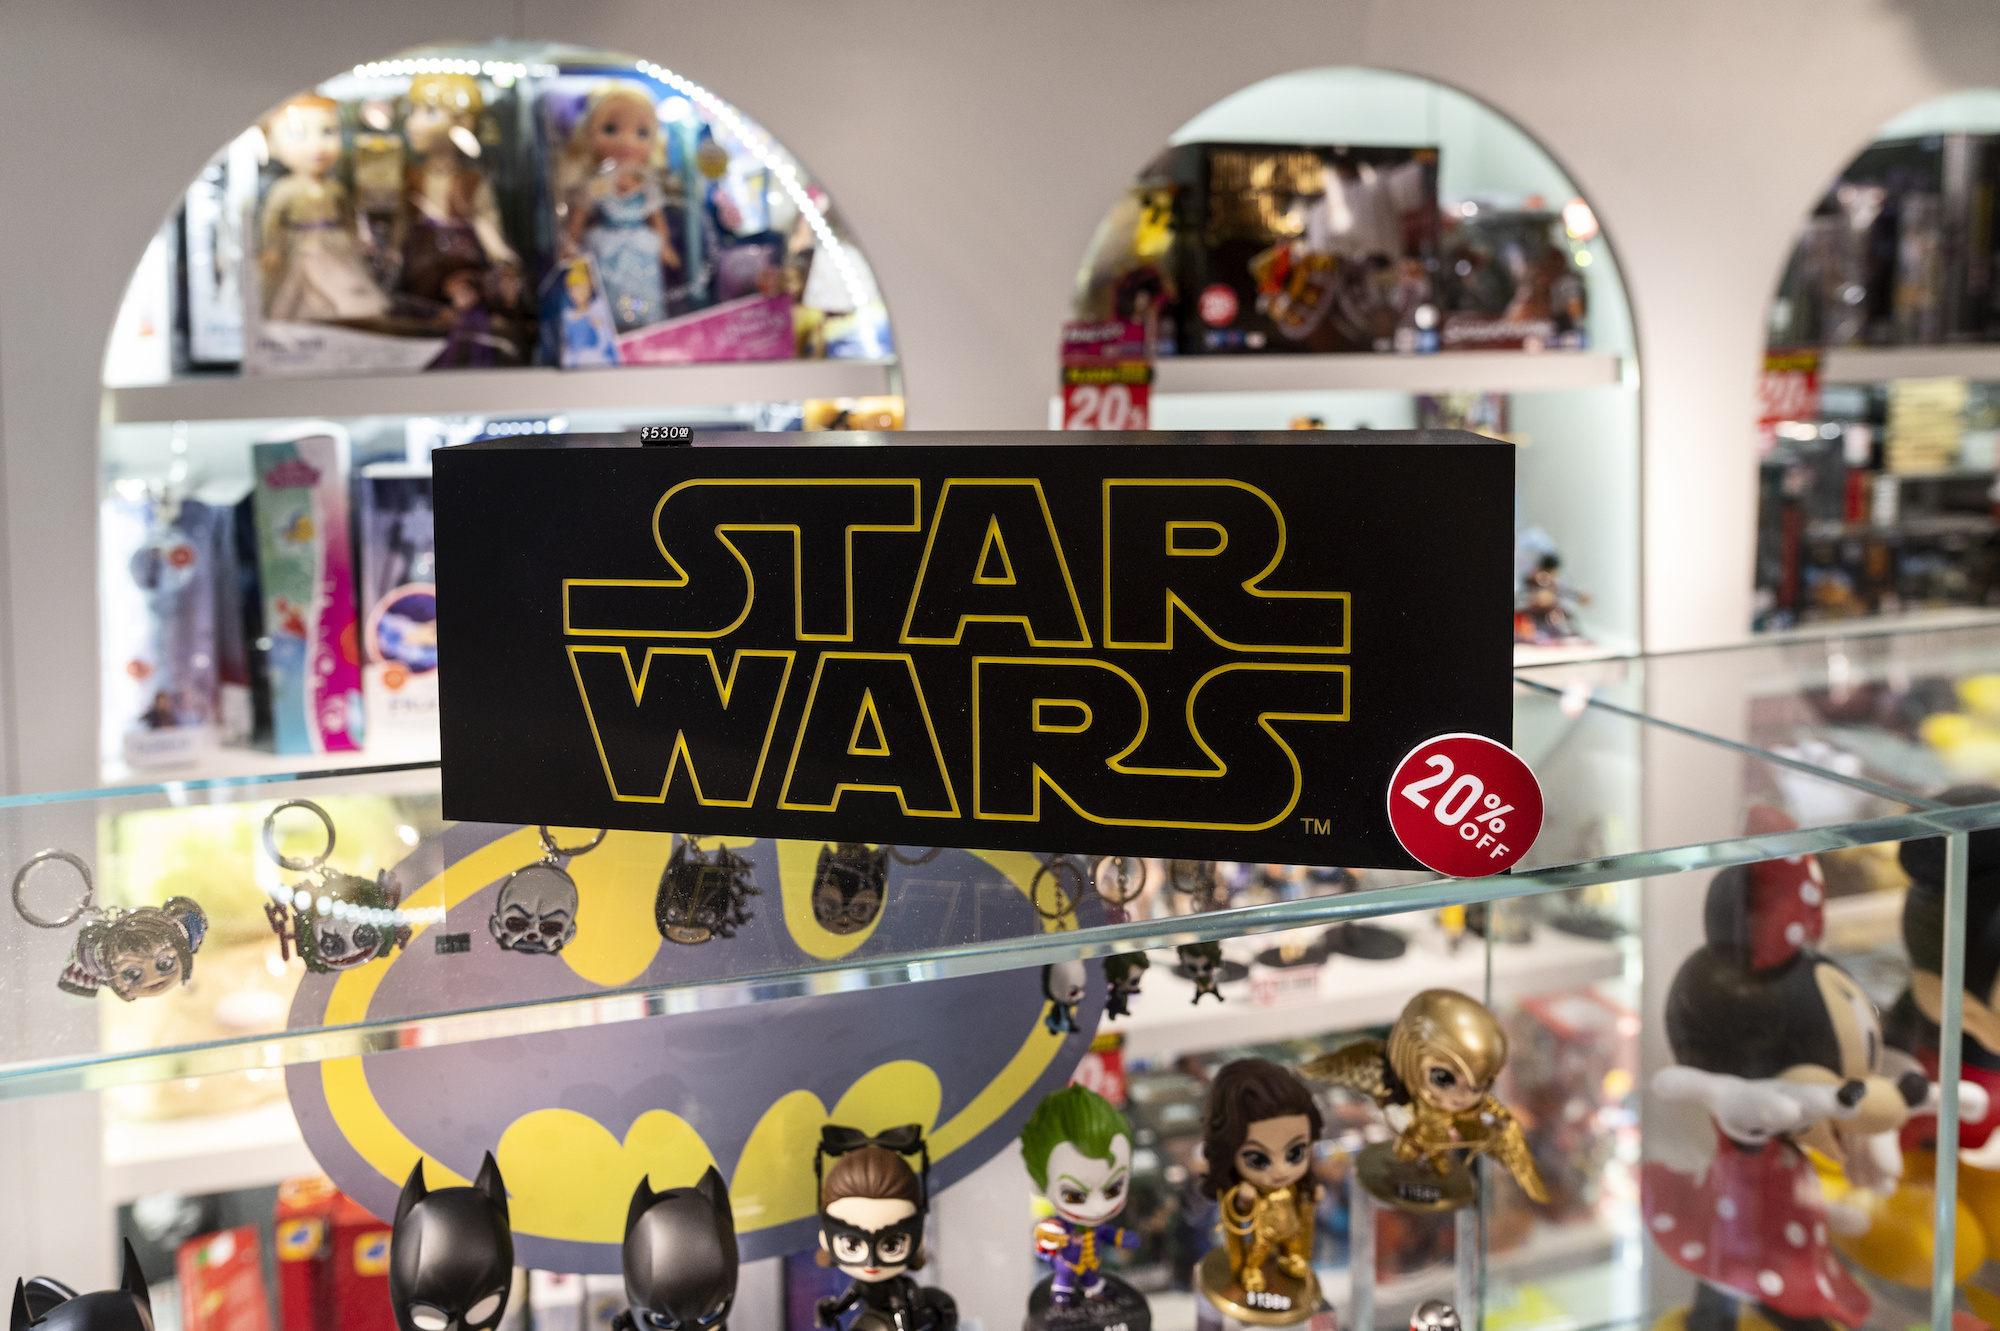 Star Wars logo on a glass case with Star Wars figurines